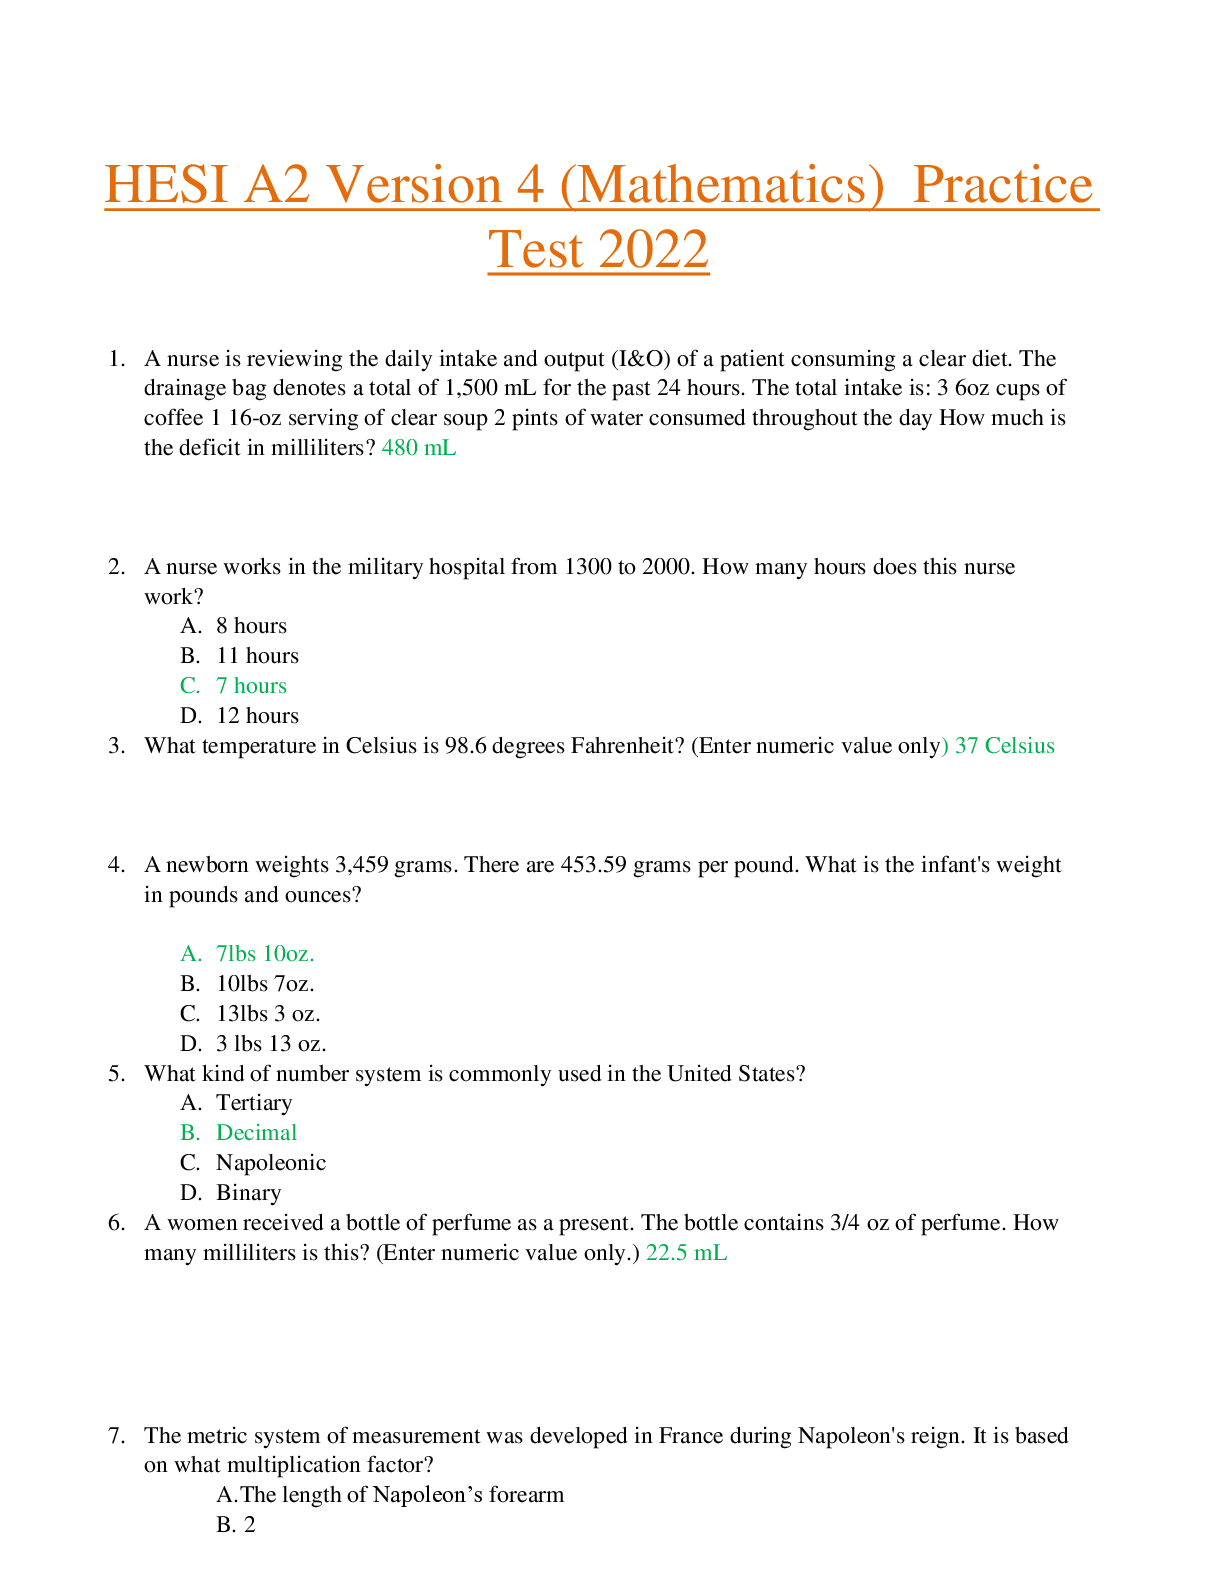 HESI A2 Version 4 (Mathematics) Practice Test 2022 Questions and